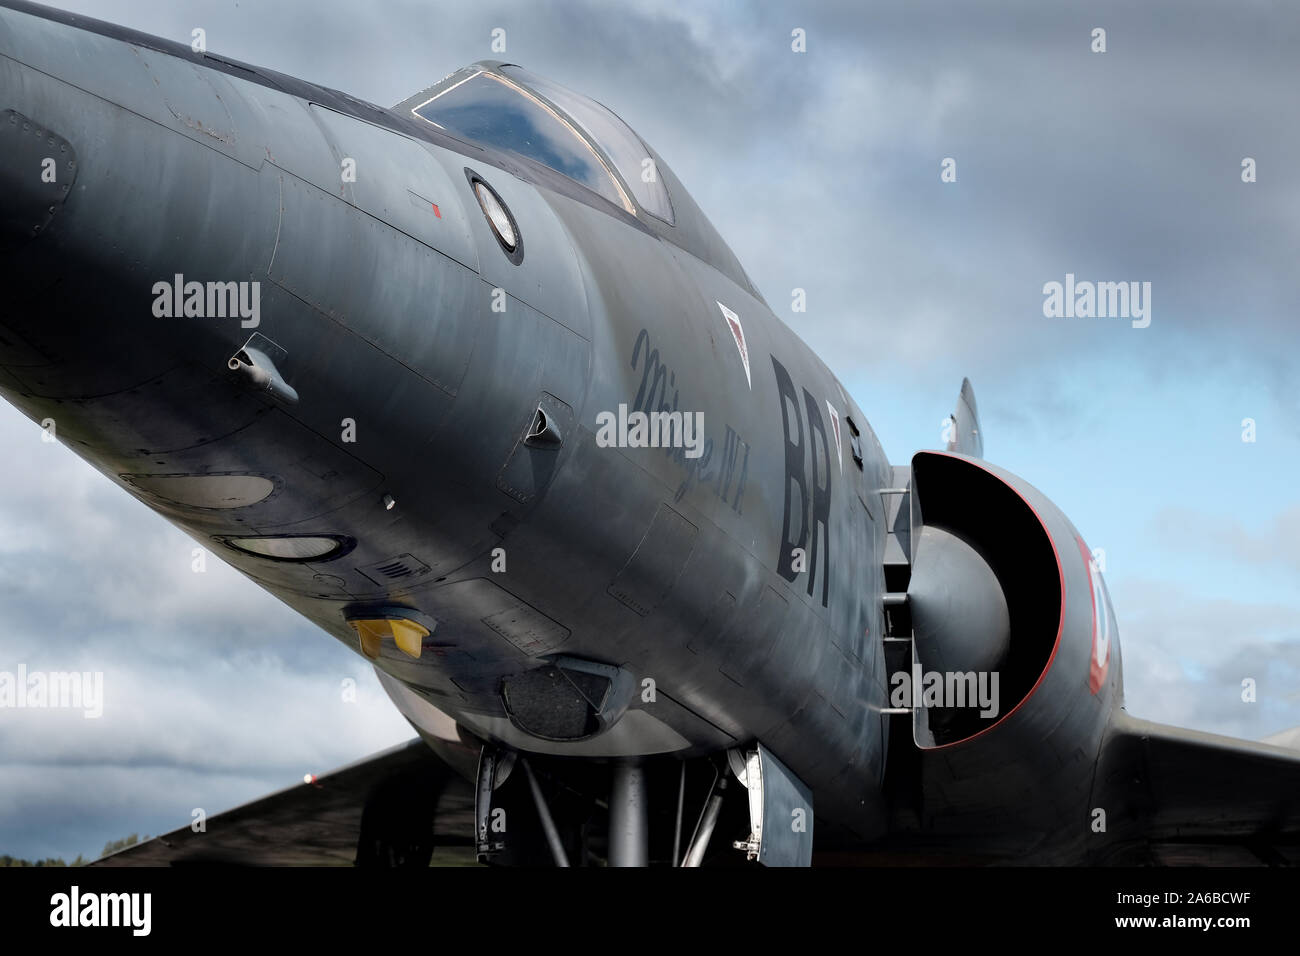 Cold war period Dassault mirage 4 nuclear bomber. Stock Photo